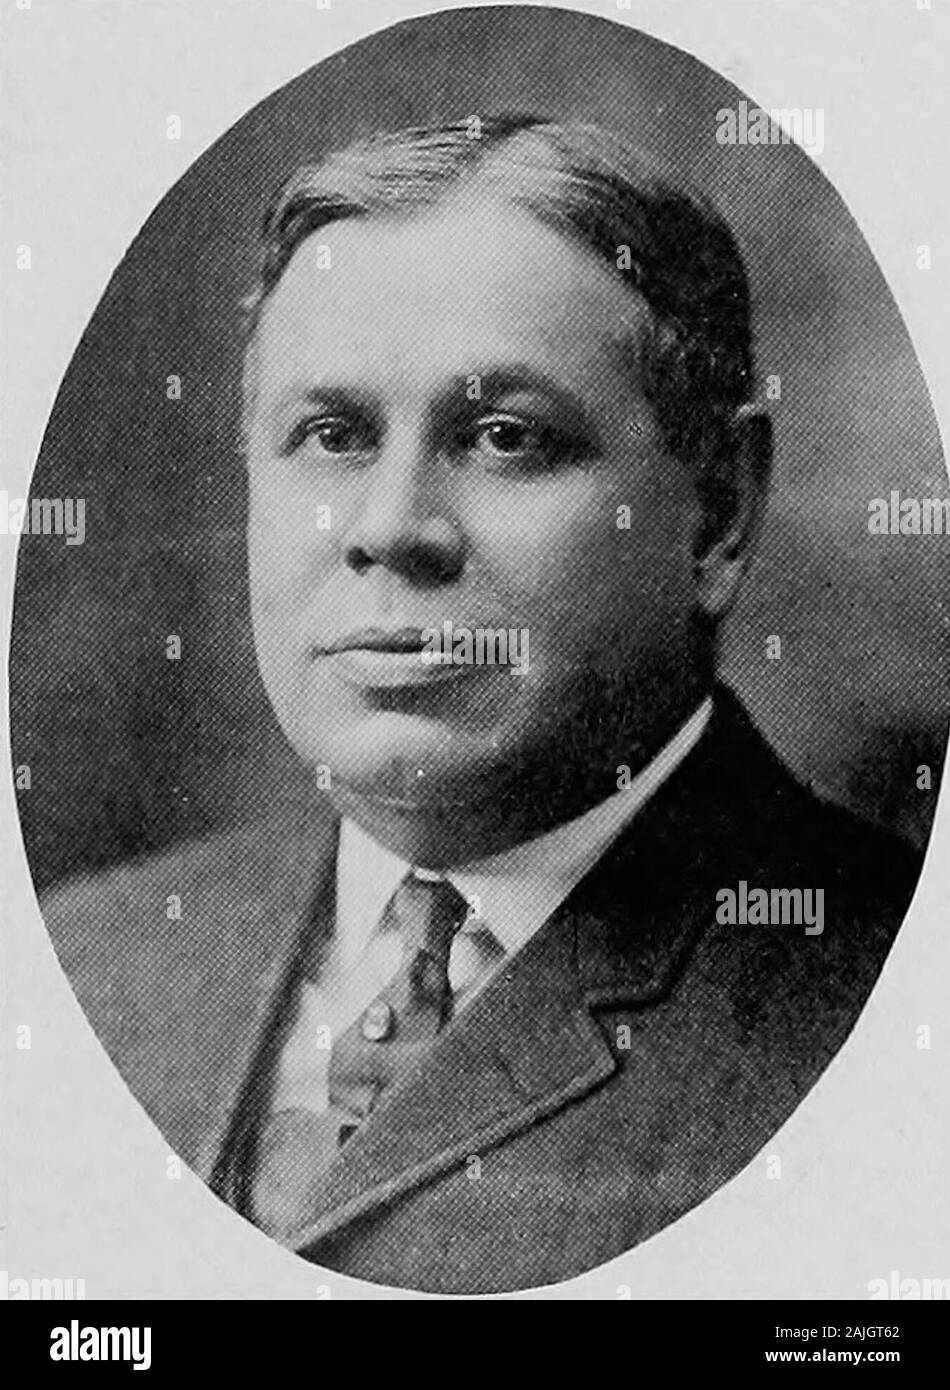 Empire State notabili, 1914 . PETER ZUCKER Consigliere-at-Law, Pres. Board of Education Cleveland 1887-1888 New York City CHRISTOPHER H. R. Avvocato Woodward, Brewer, Vlce-Pres., Secy e Dir. Clausen-Flanagan Brewing Co. New York City 150 Empire State notabili avvocati Foto Stock